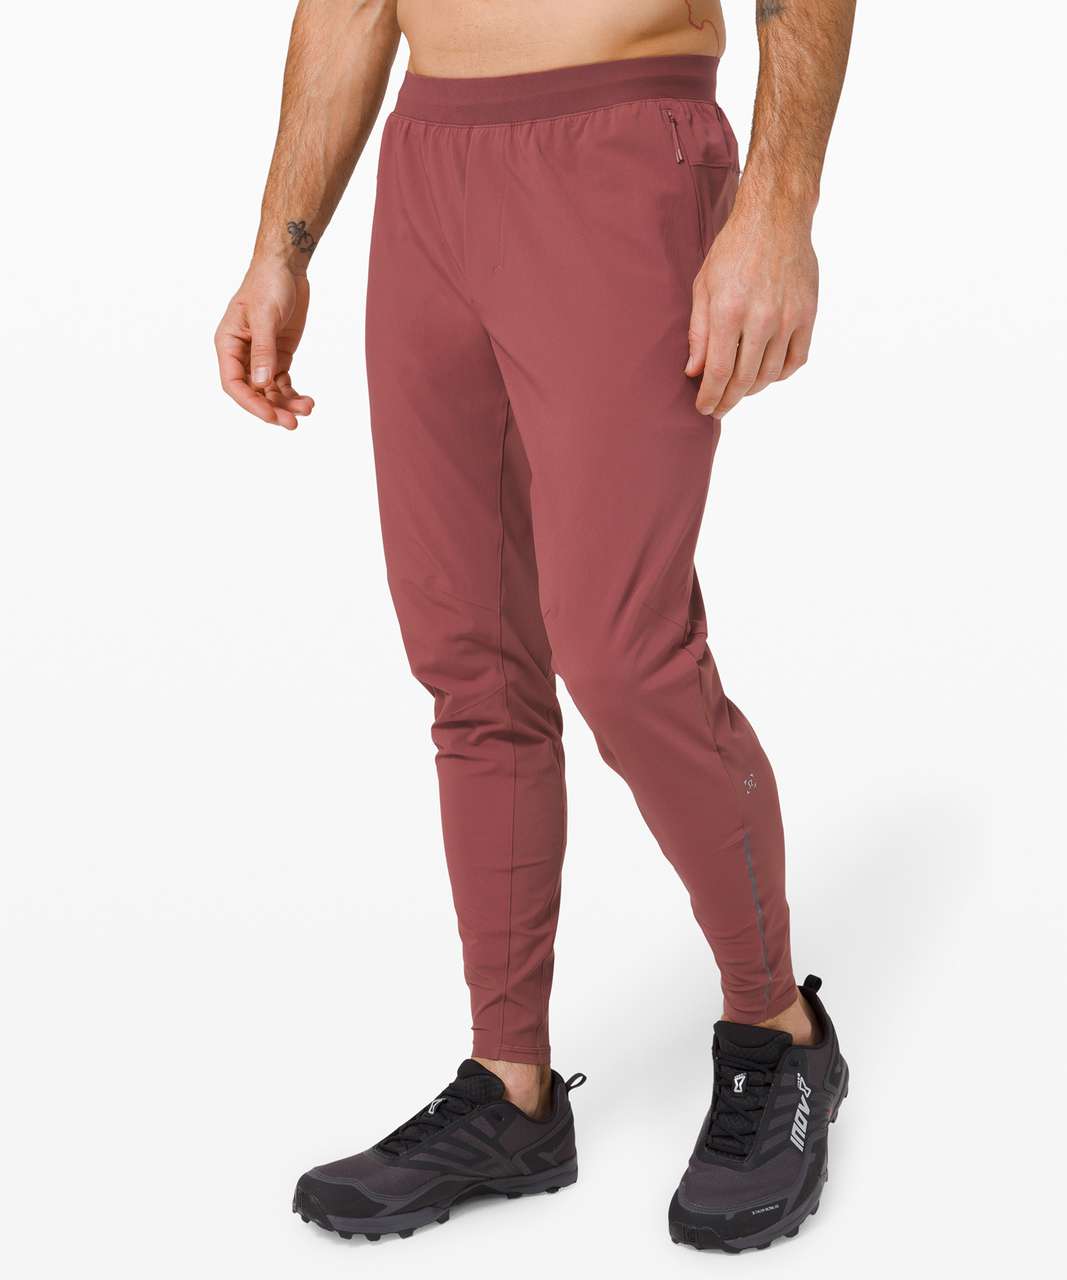 lululemon Surge Hybrid Pant - half jogger AND half pant all in one